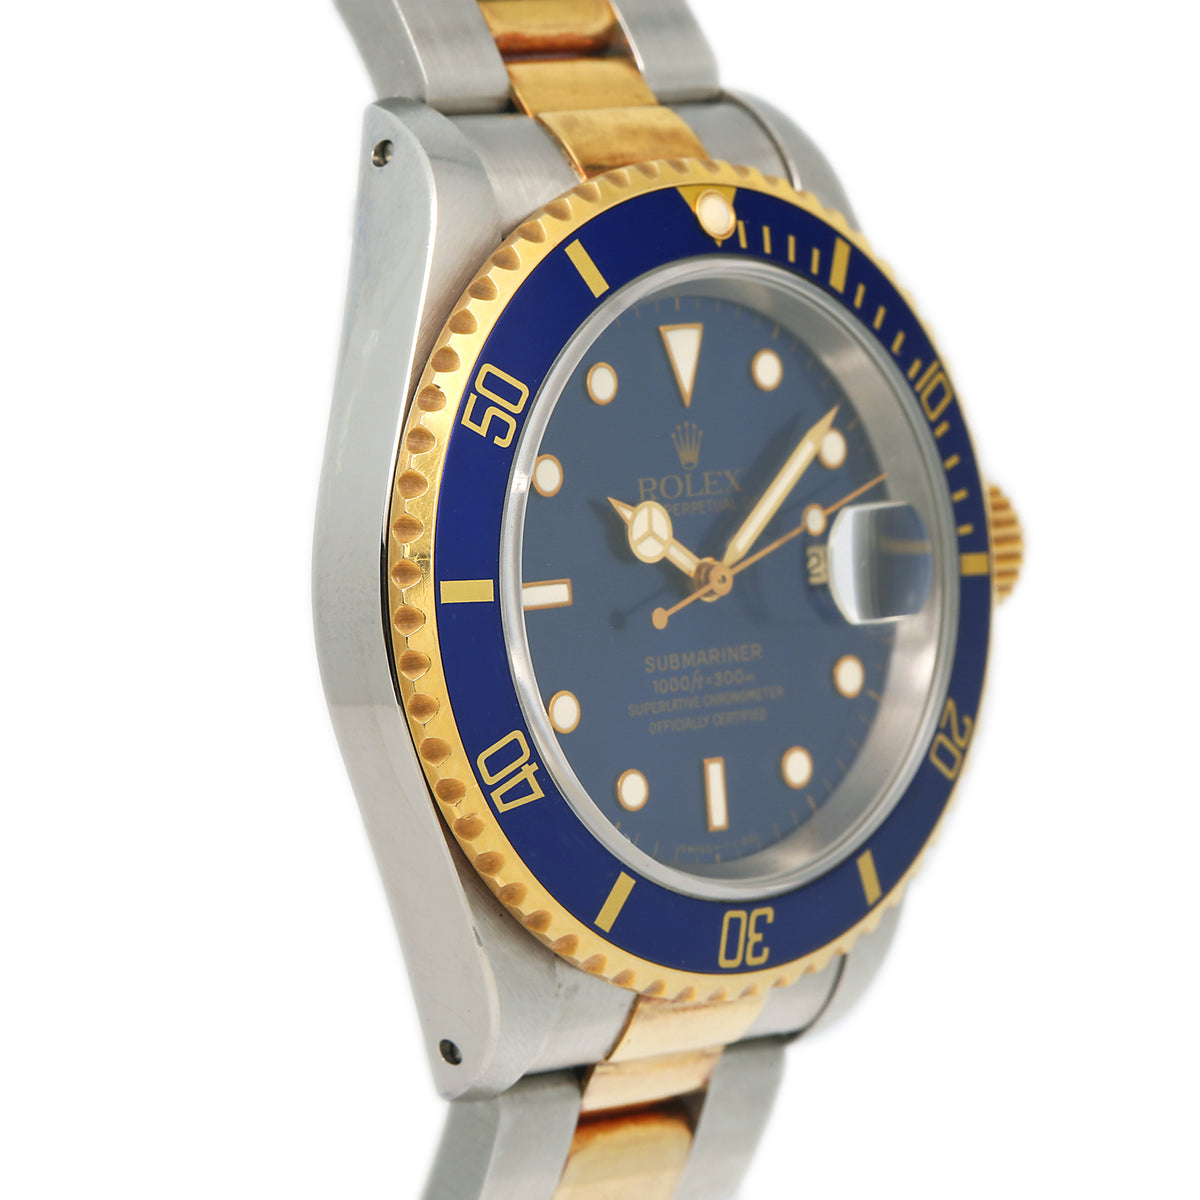 Rolex Submariner 16613 18k Yellow Gold 2 Tone Blue Dial Watch 40mm Box&OpenPaper